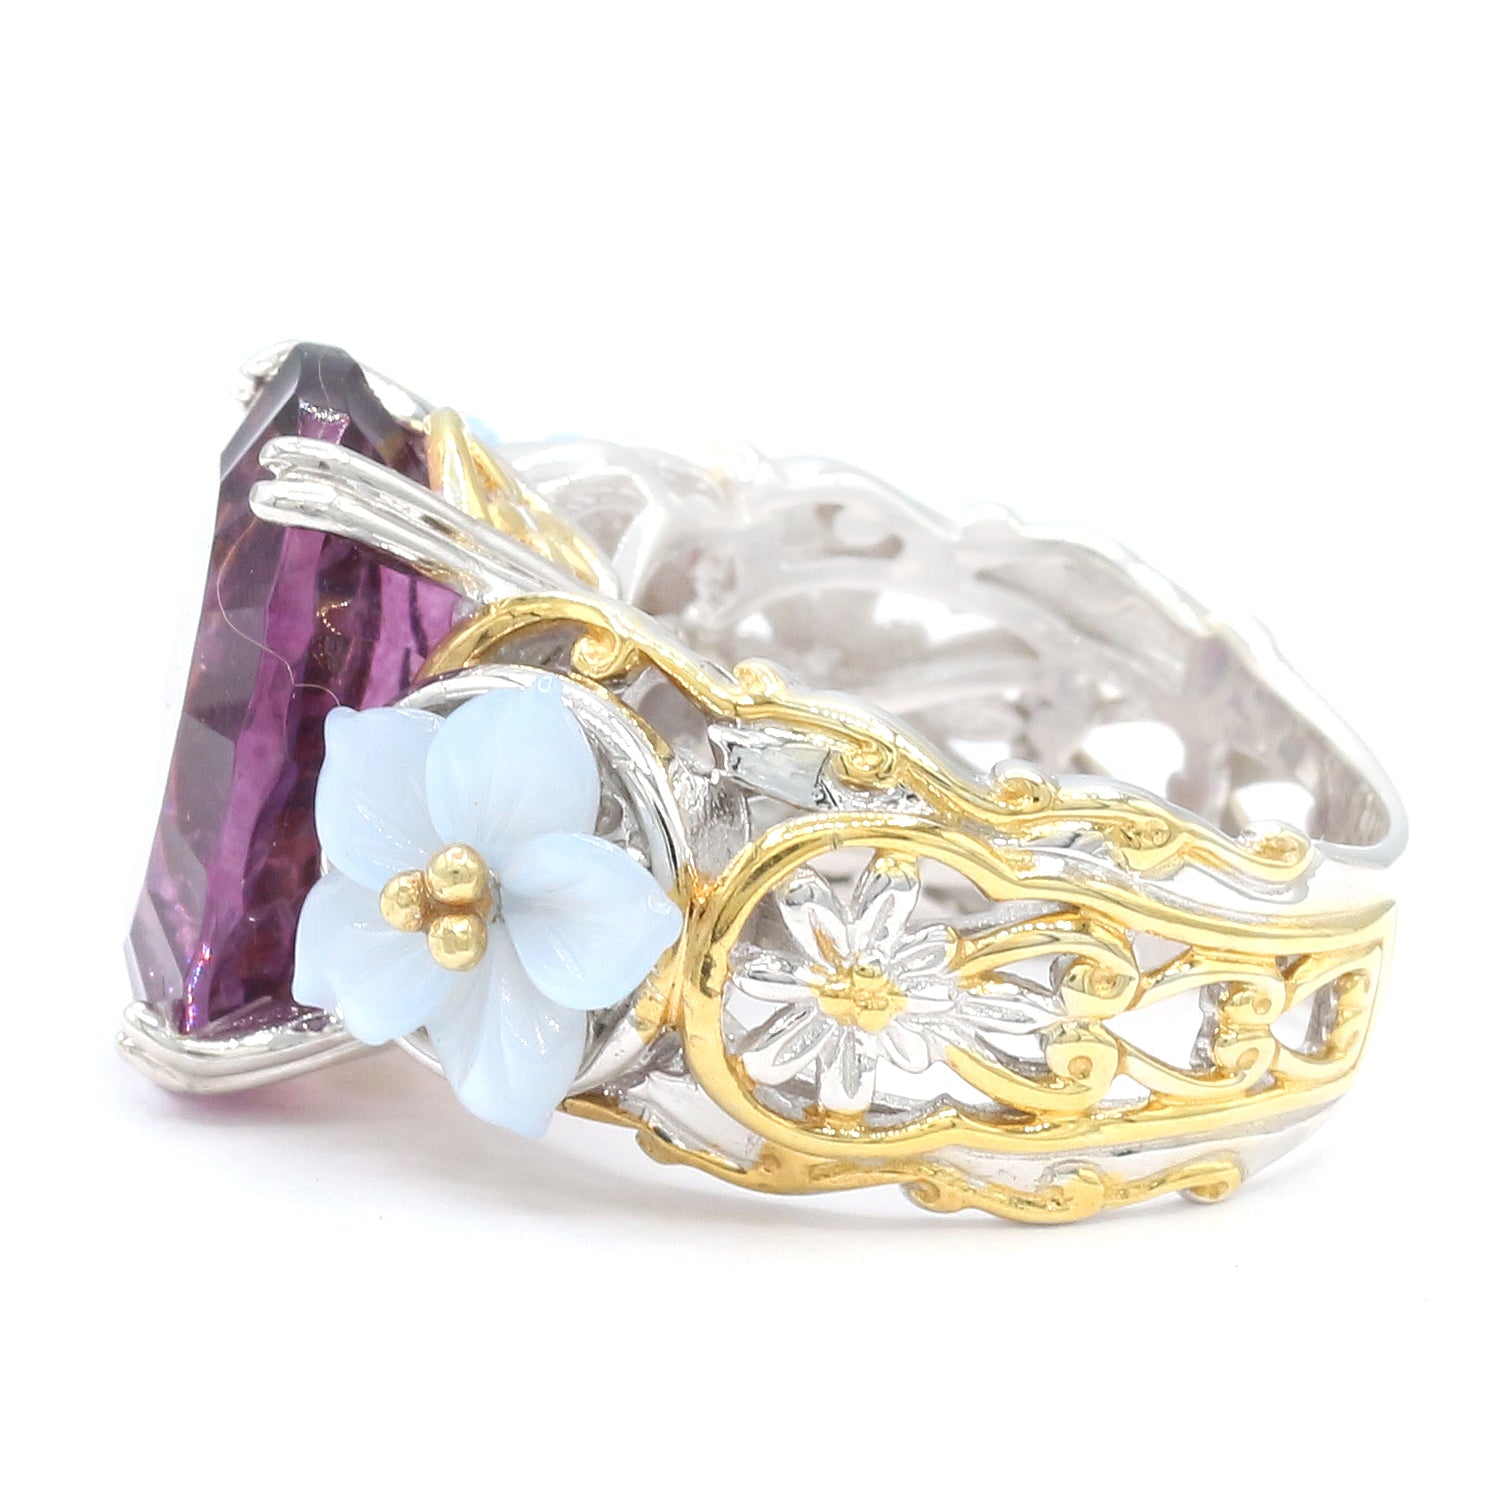 Gems en Vogue One-of-a-kind 9.96ctw Millennium Special Cut Raspberry Fluorite & Carved Blue Chalcedony Flower Ring